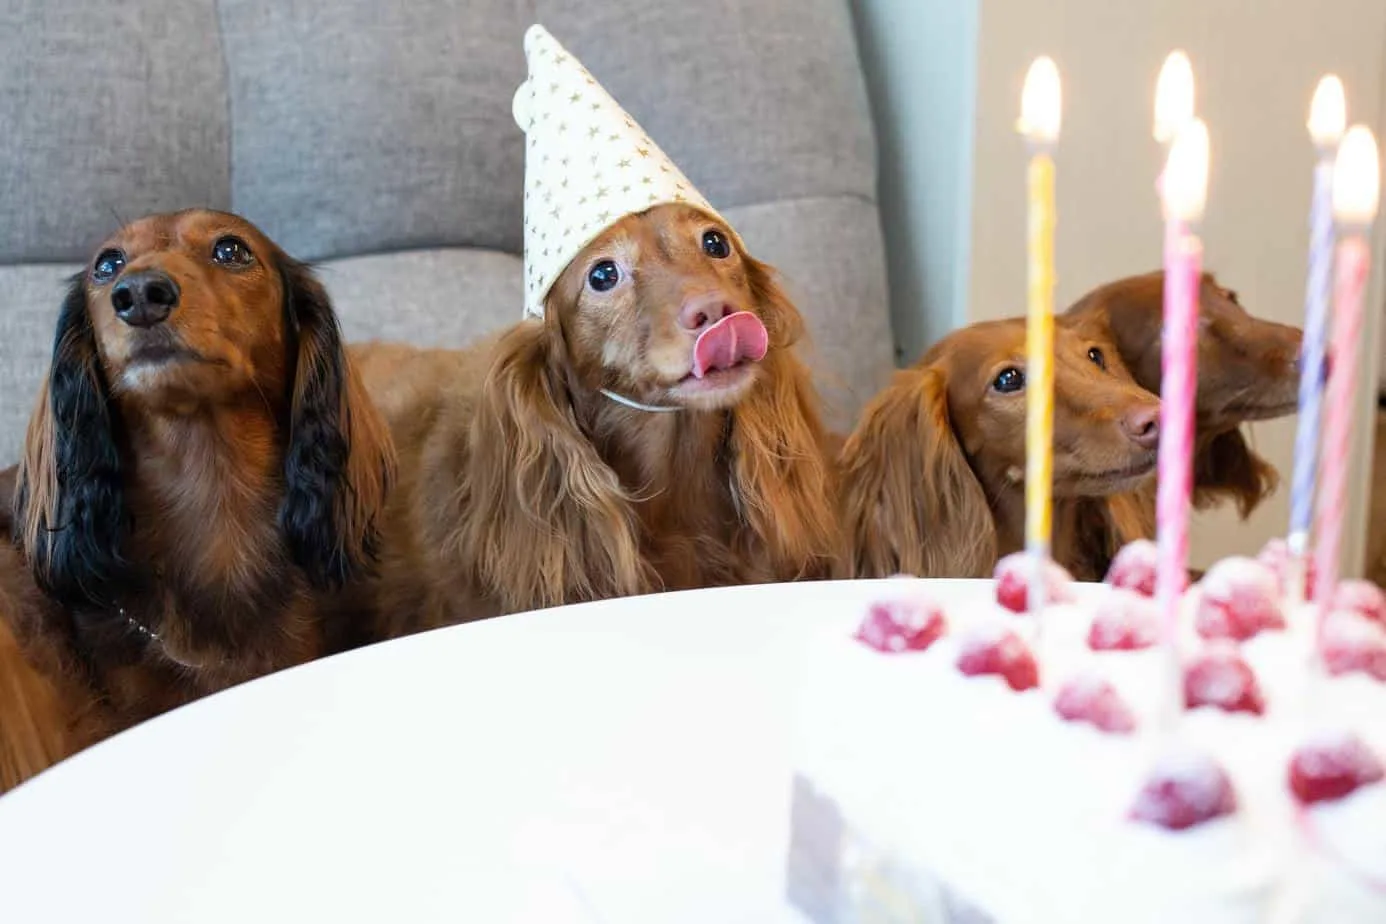 A picture of an adorable dog, celebrating her birthday.